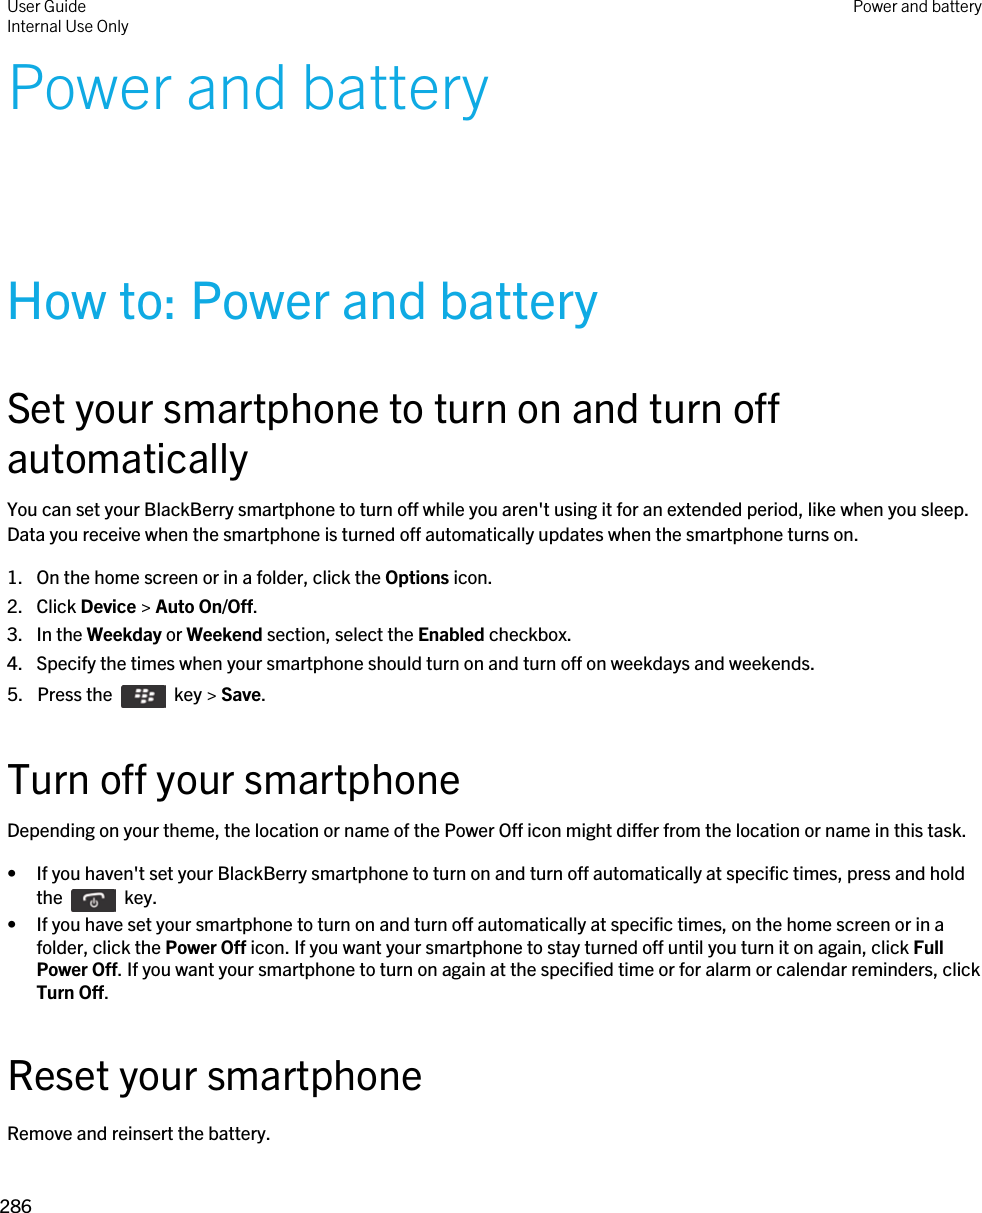 Power and batteryHow to: Power and batterySet your smartphone to turn on and turn off automaticallyYou can set your BlackBerry smartphone to turn off while you aren&apos;t using it for an extended period, like when you sleep. Data you receive when the smartphone is turned off automatically updates when the smartphone turns on.1. On the home screen or in a folder, click the Options icon.2. Click Device &gt; Auto On/Off.3. In the Weekday or Weekend section, select the Enabled checkbox.4. Specify the times when your smartphone should turn on and turn off on weekdays and weekends.5.  Press the    key &gt; Save. Turn off your smartphoneDepending on your theme, the location or name of the Power Off icon might differ from the location or name in this task.• If you haven&apos;t set your BlackBerry smartphone to turn on and turn off automatically at specific times, press and hold the    key. • If you have set your smartphone to turn on and turn off automatically at specific times, on the home screen or in a folder, click the Power Off icon. If you want your smartphone to stay turned off until you turn it on again, click Full Power Off. If you want your smartphone to turn on again at the specified time or for alarm or calendar reminders, click Turn Off.Reset your smartphoneRemove and reinsert the battery.User GuideInternal Use Only Power and battery286 